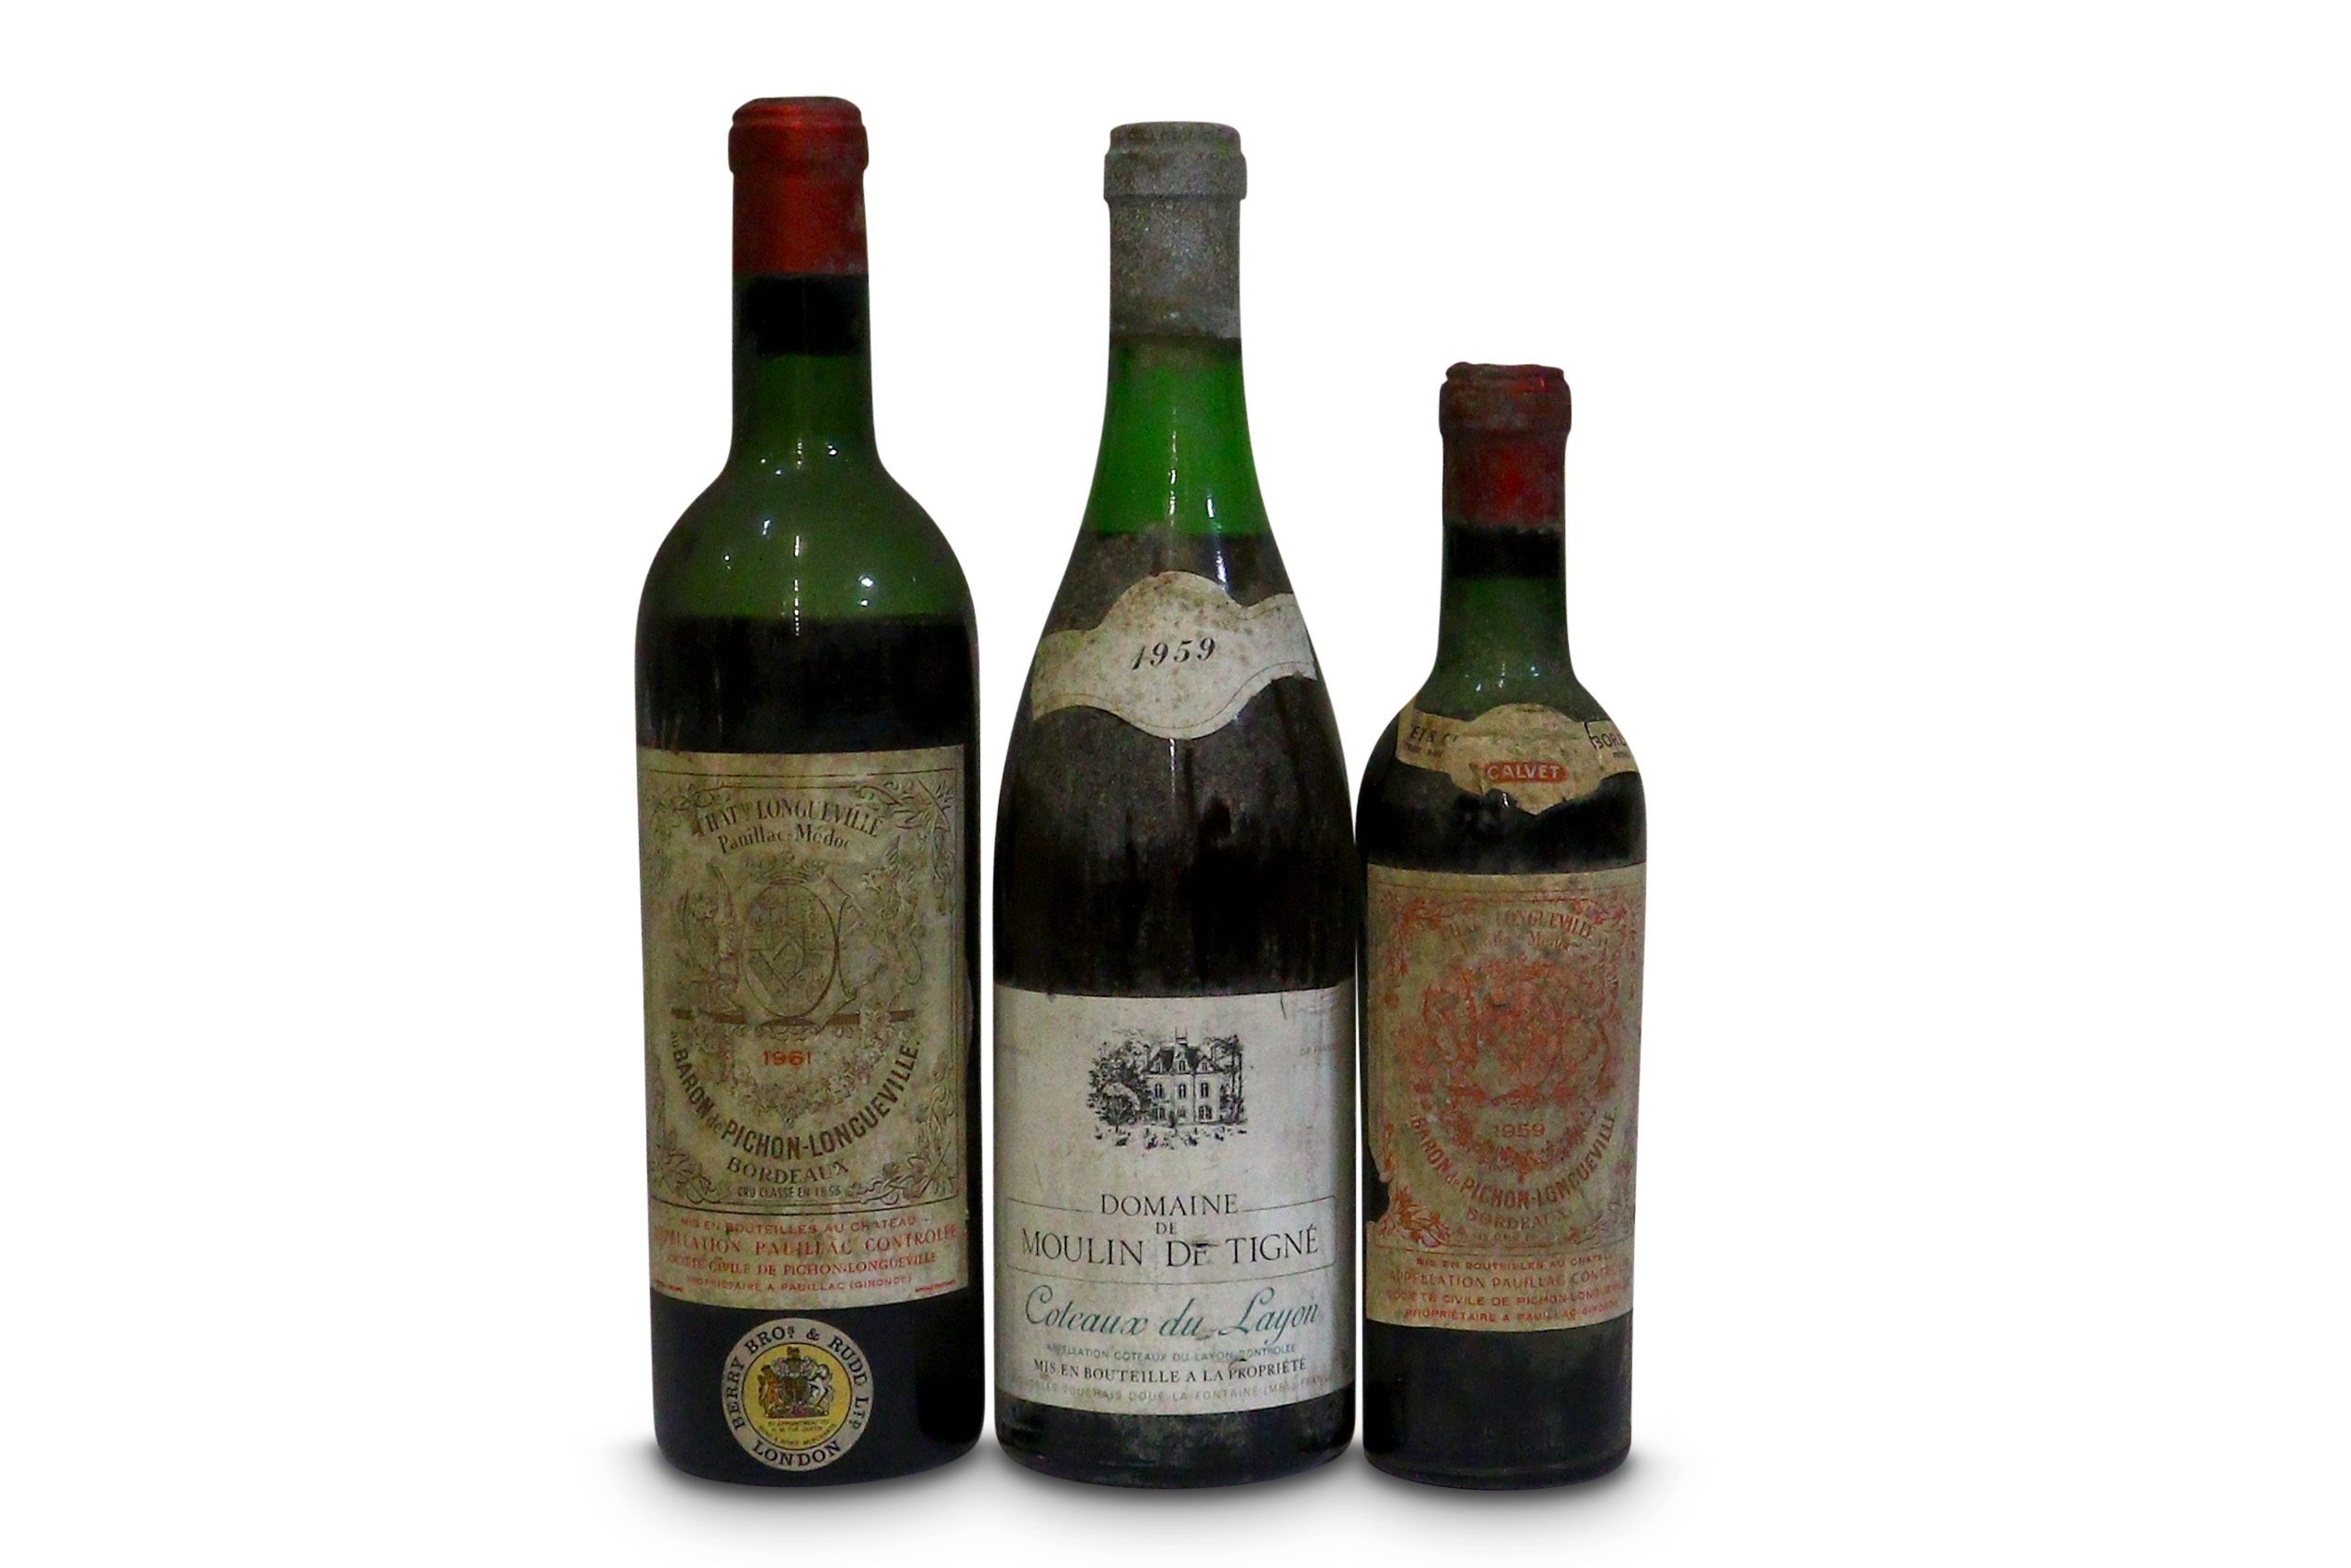 A Pair of 60 year old French wines